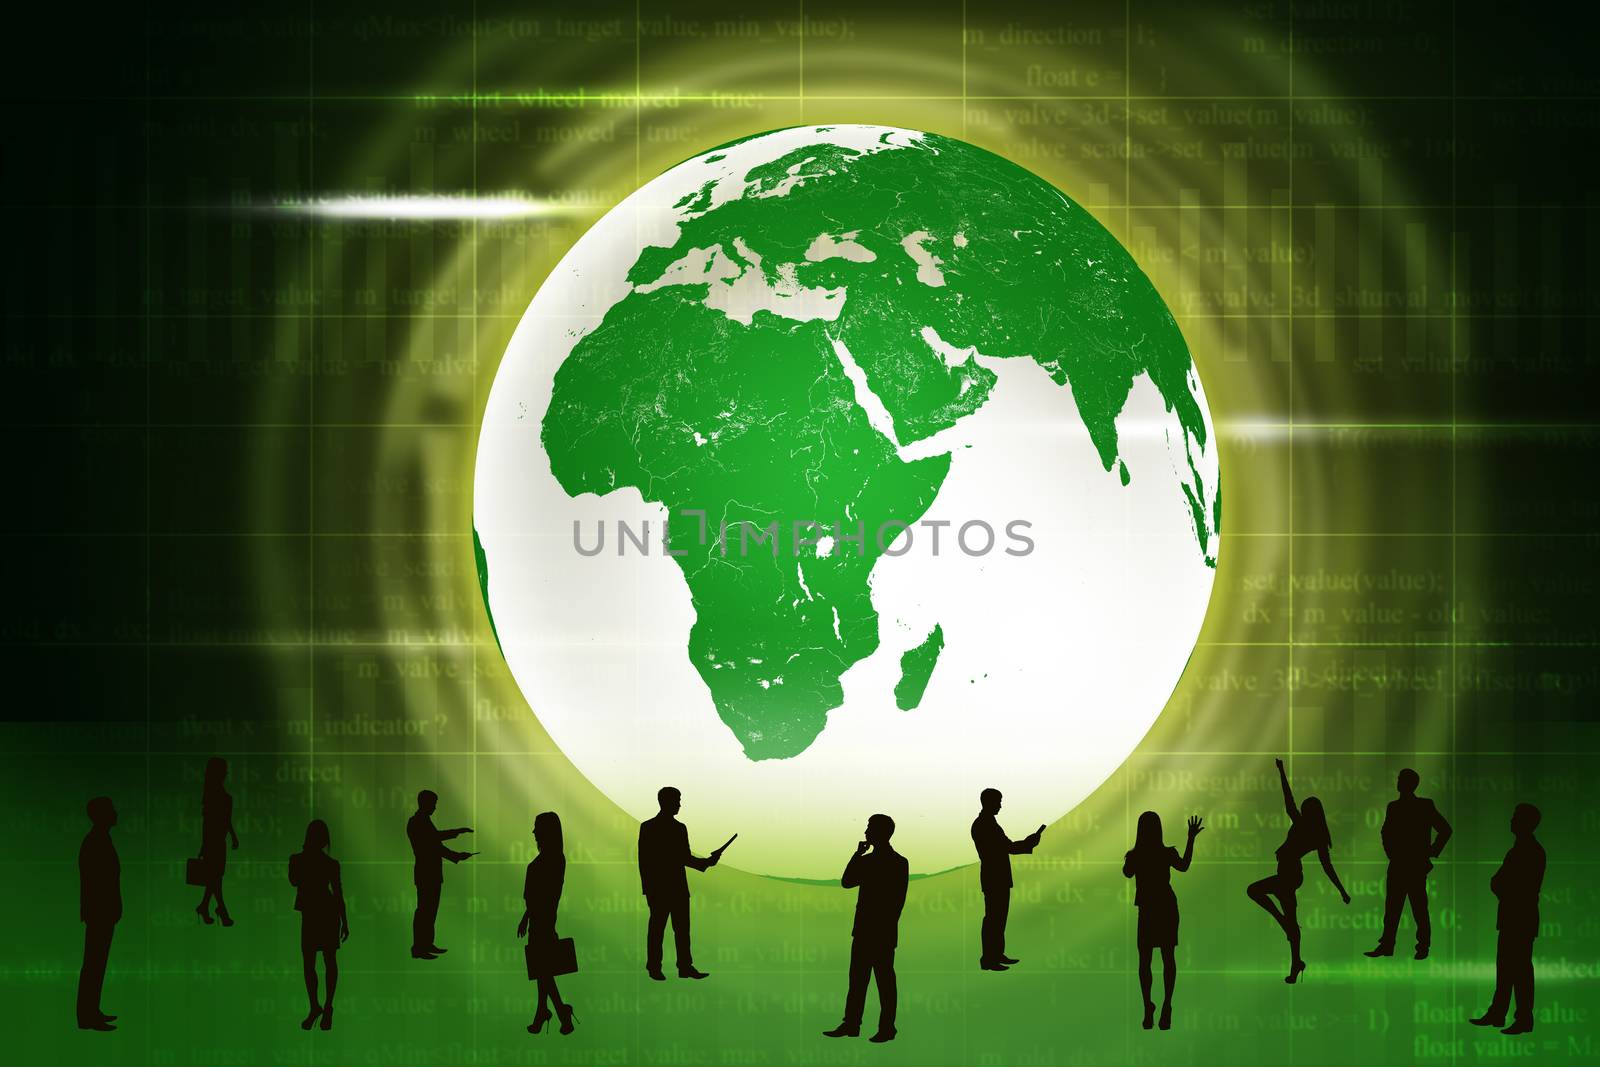 Silhouettes of business people in different postures on abstract green background with earth. Elements of this image furnished by NASA